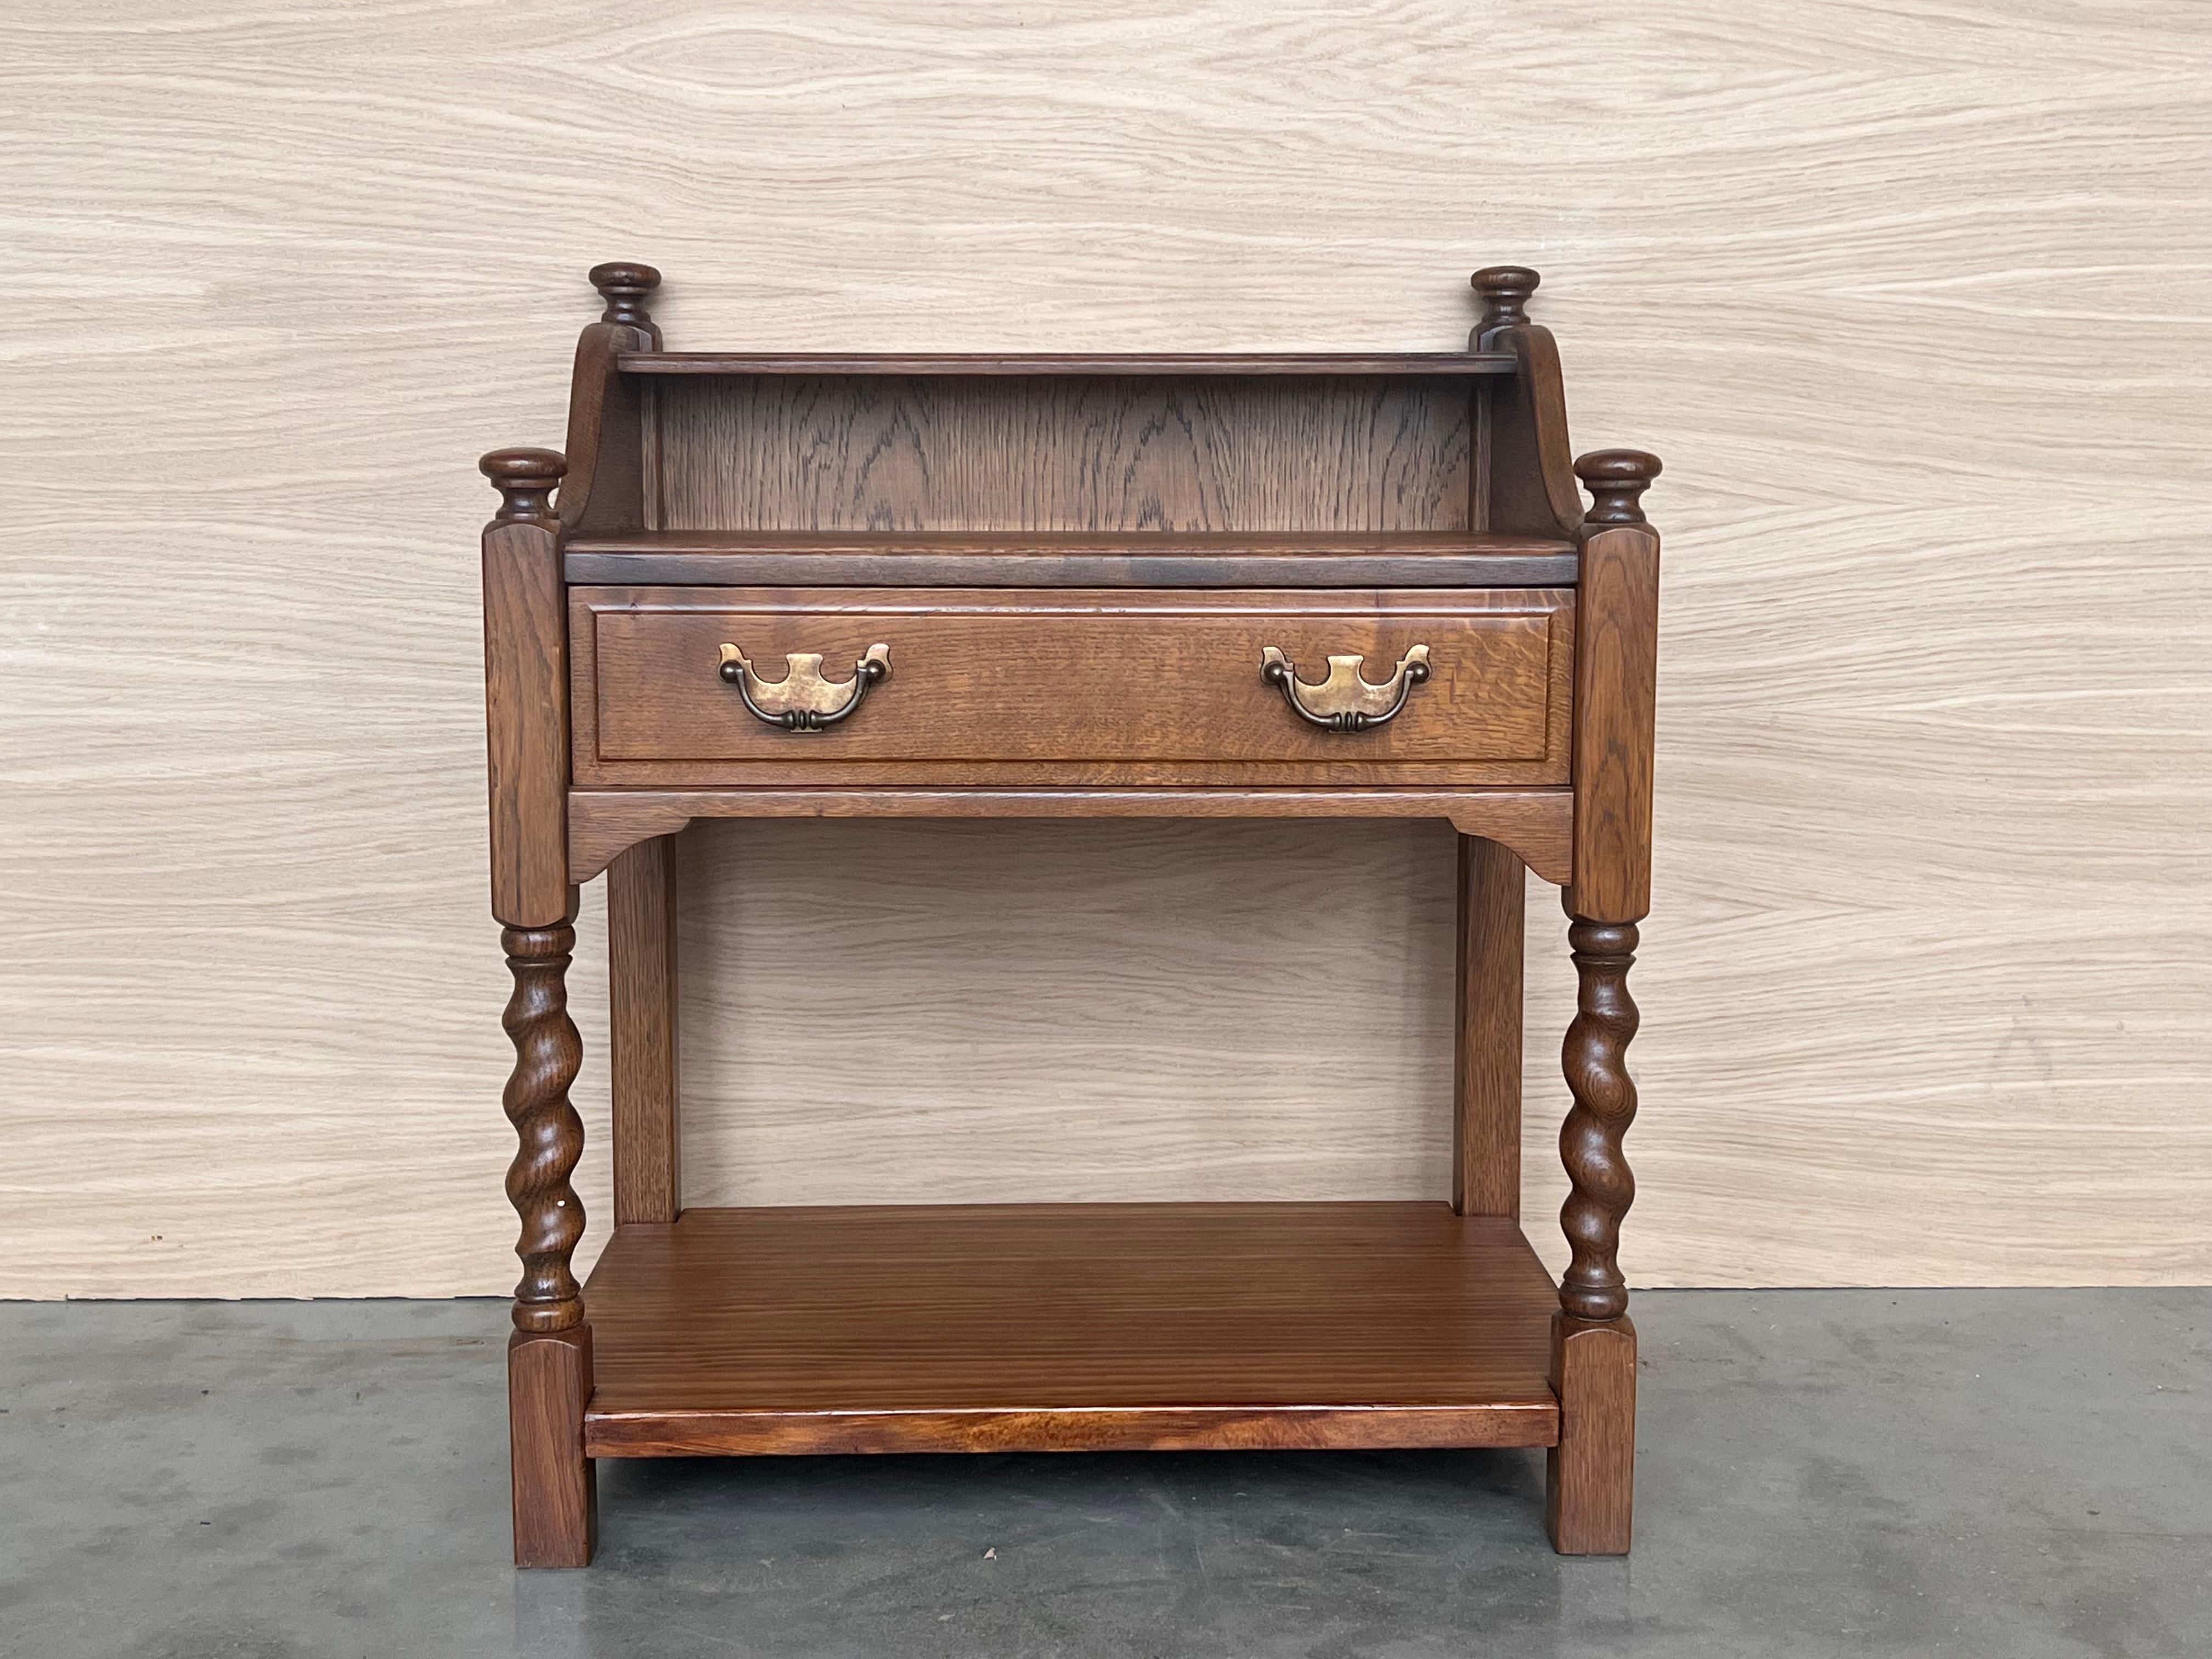 20th century Pair of solid carved Spanish nightstands with turned columns and low shelve. The nightstands have a crest to make this pieces different and very useful.


Measure: height to the low shelve: 3.34 in.